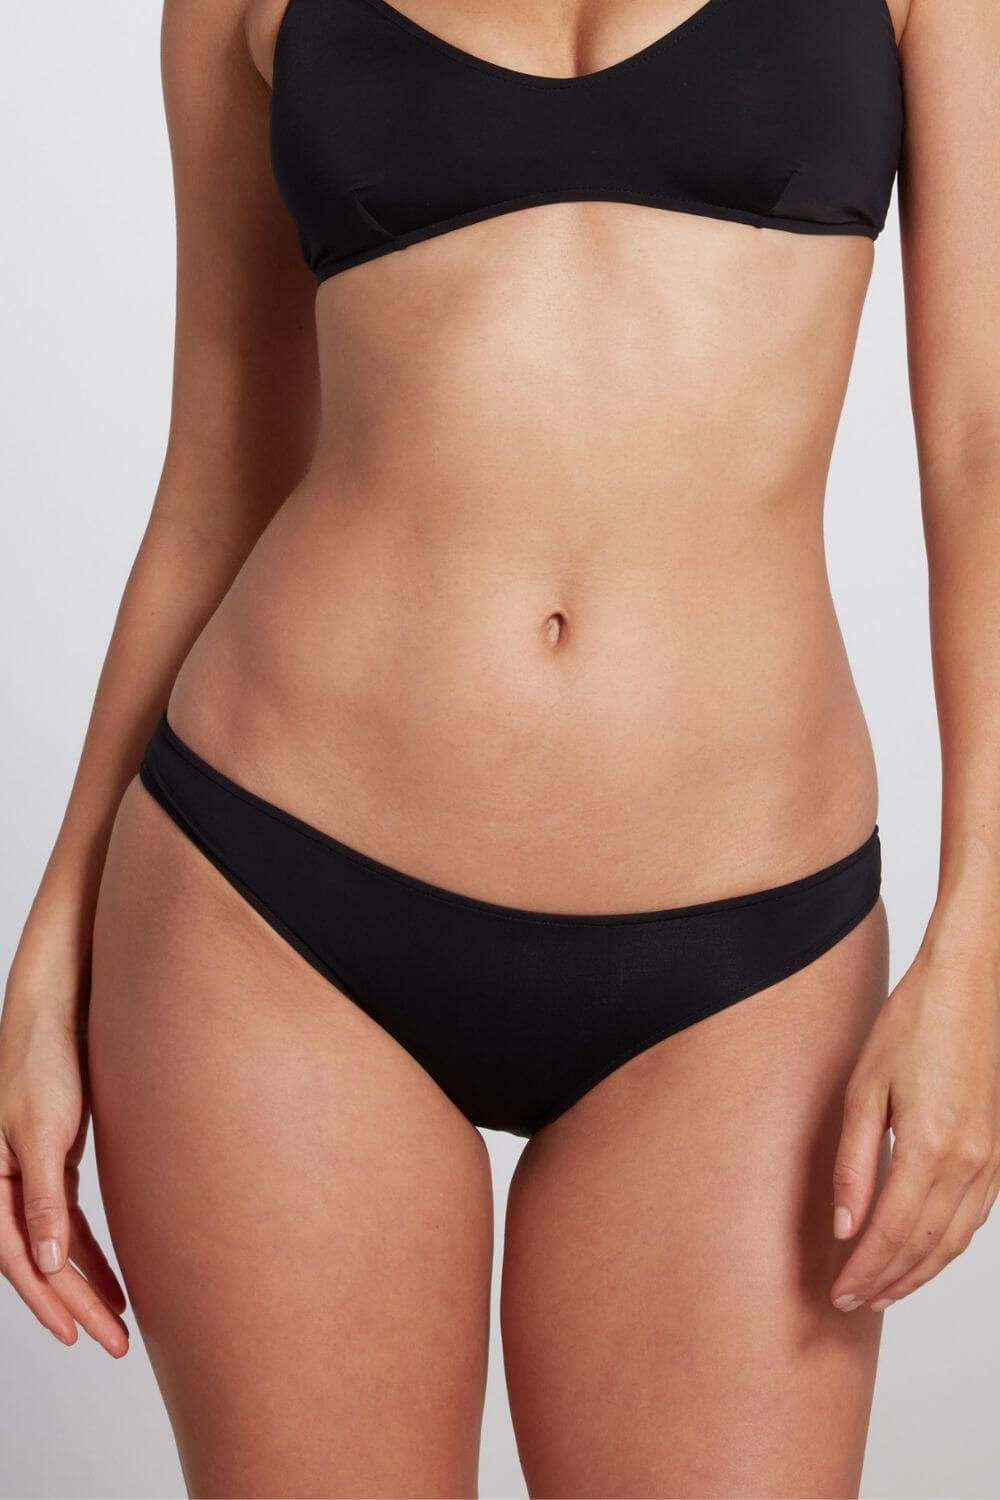 Black low rise classic brief bikini bottom, the Jenna is a staple in your summer wardrobe.